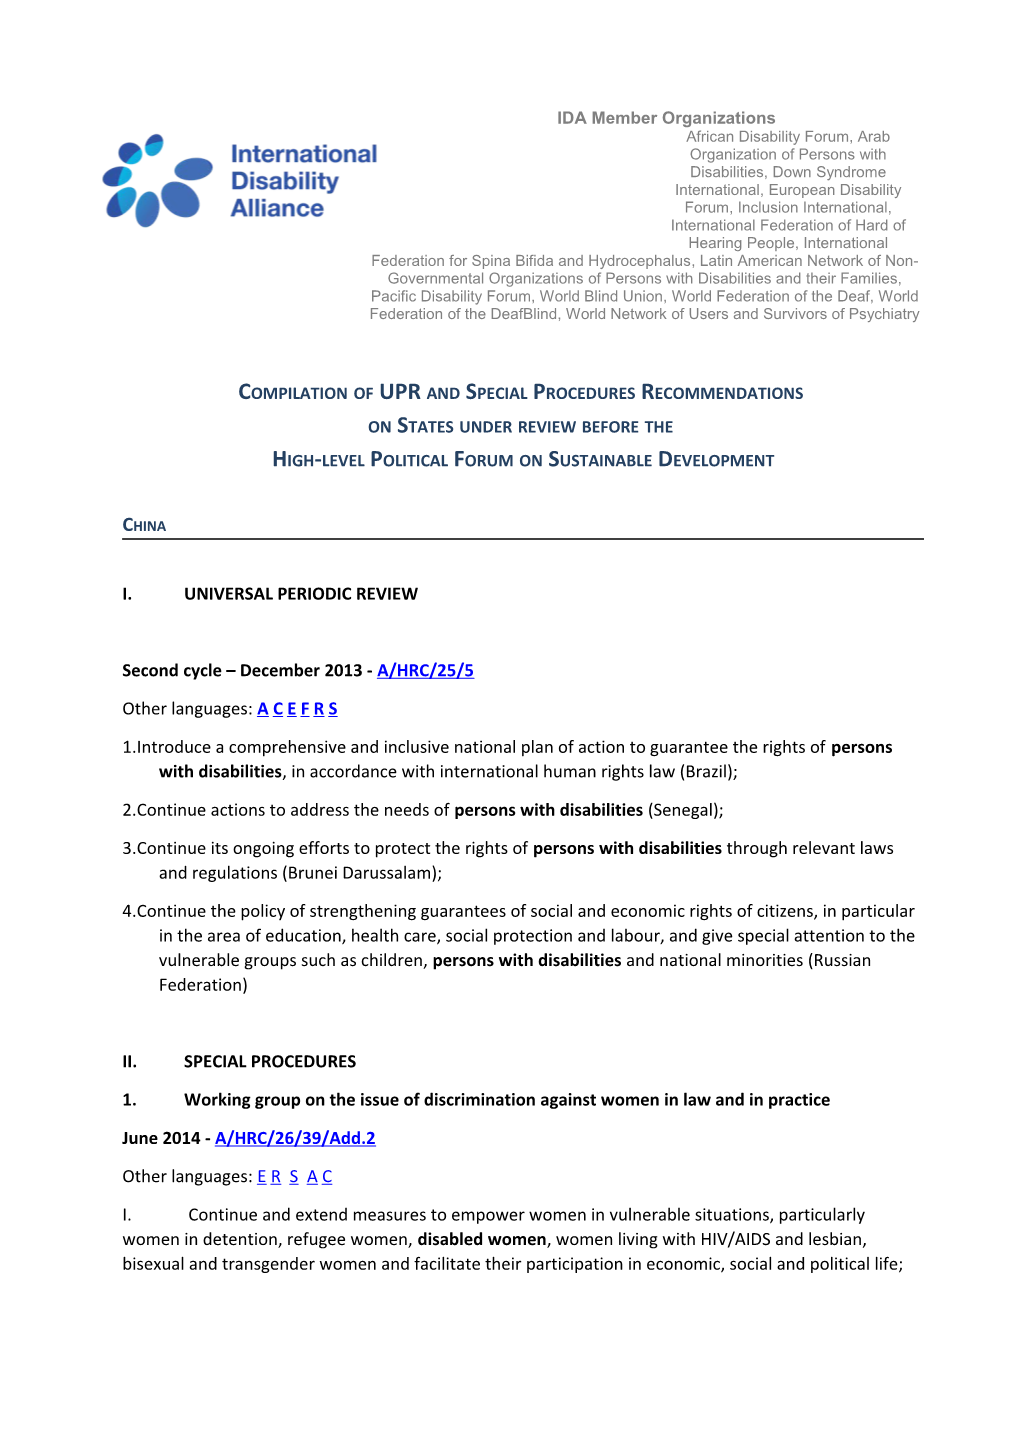 Compilationof UPR and Special Procedures Recommendations